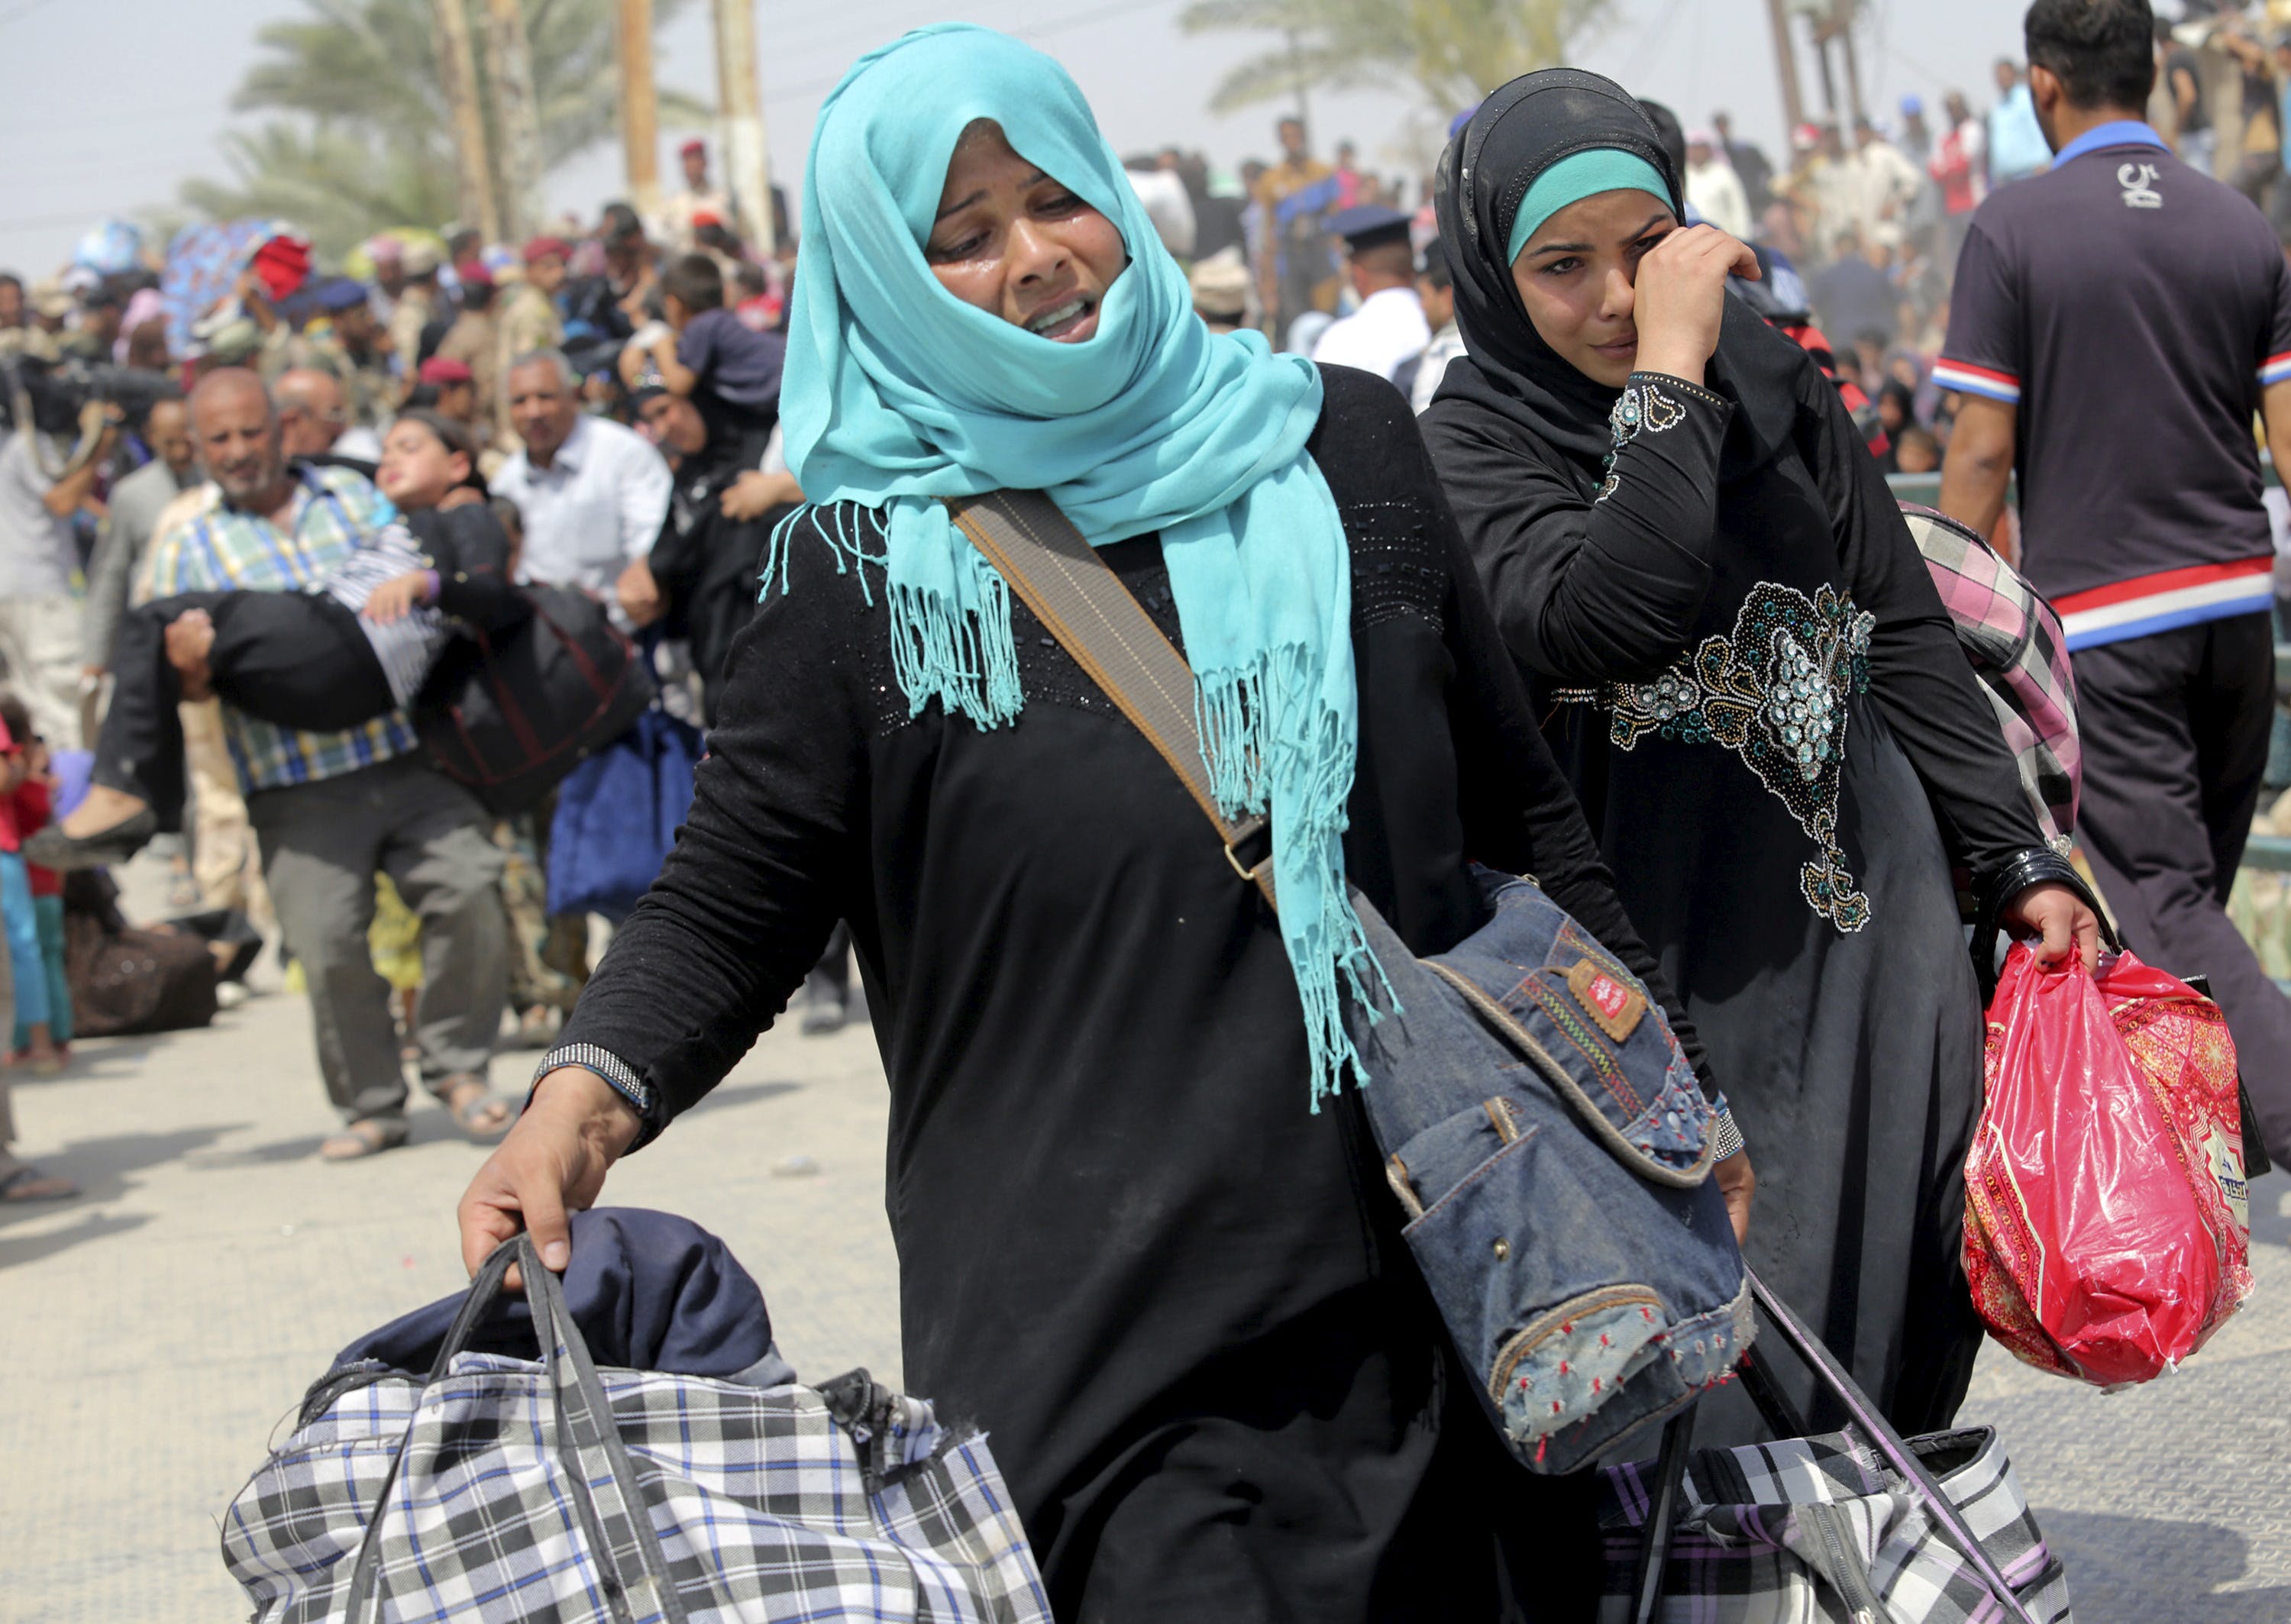 Displaced Sunni women fleeing the violence in Ramadi, carry bags as they walk on the outskirts of Baghdad